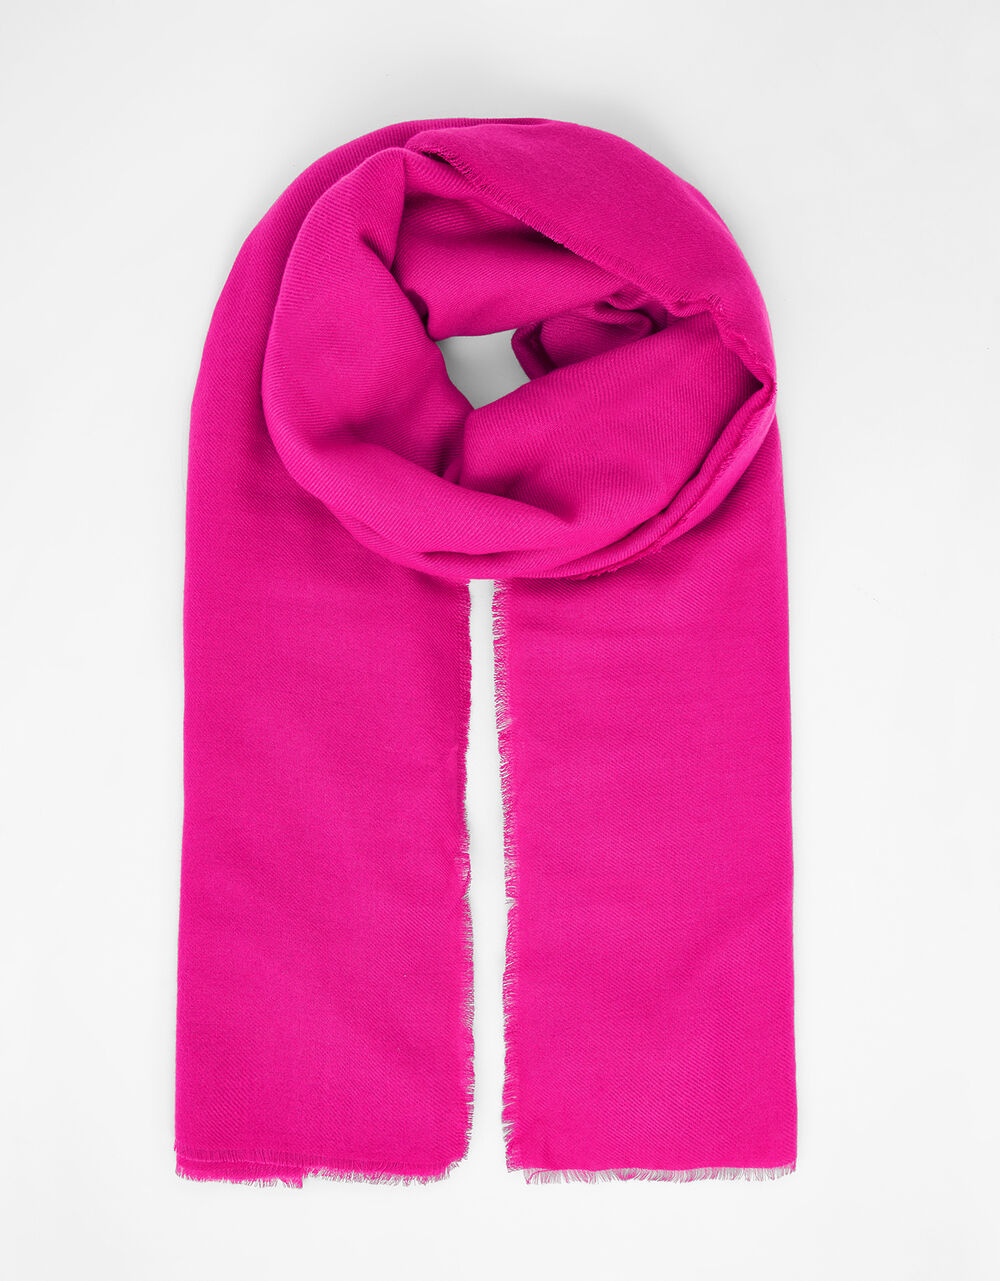 Take Me Everywhere Scarf | Lightweight scarves | Accessorize UK